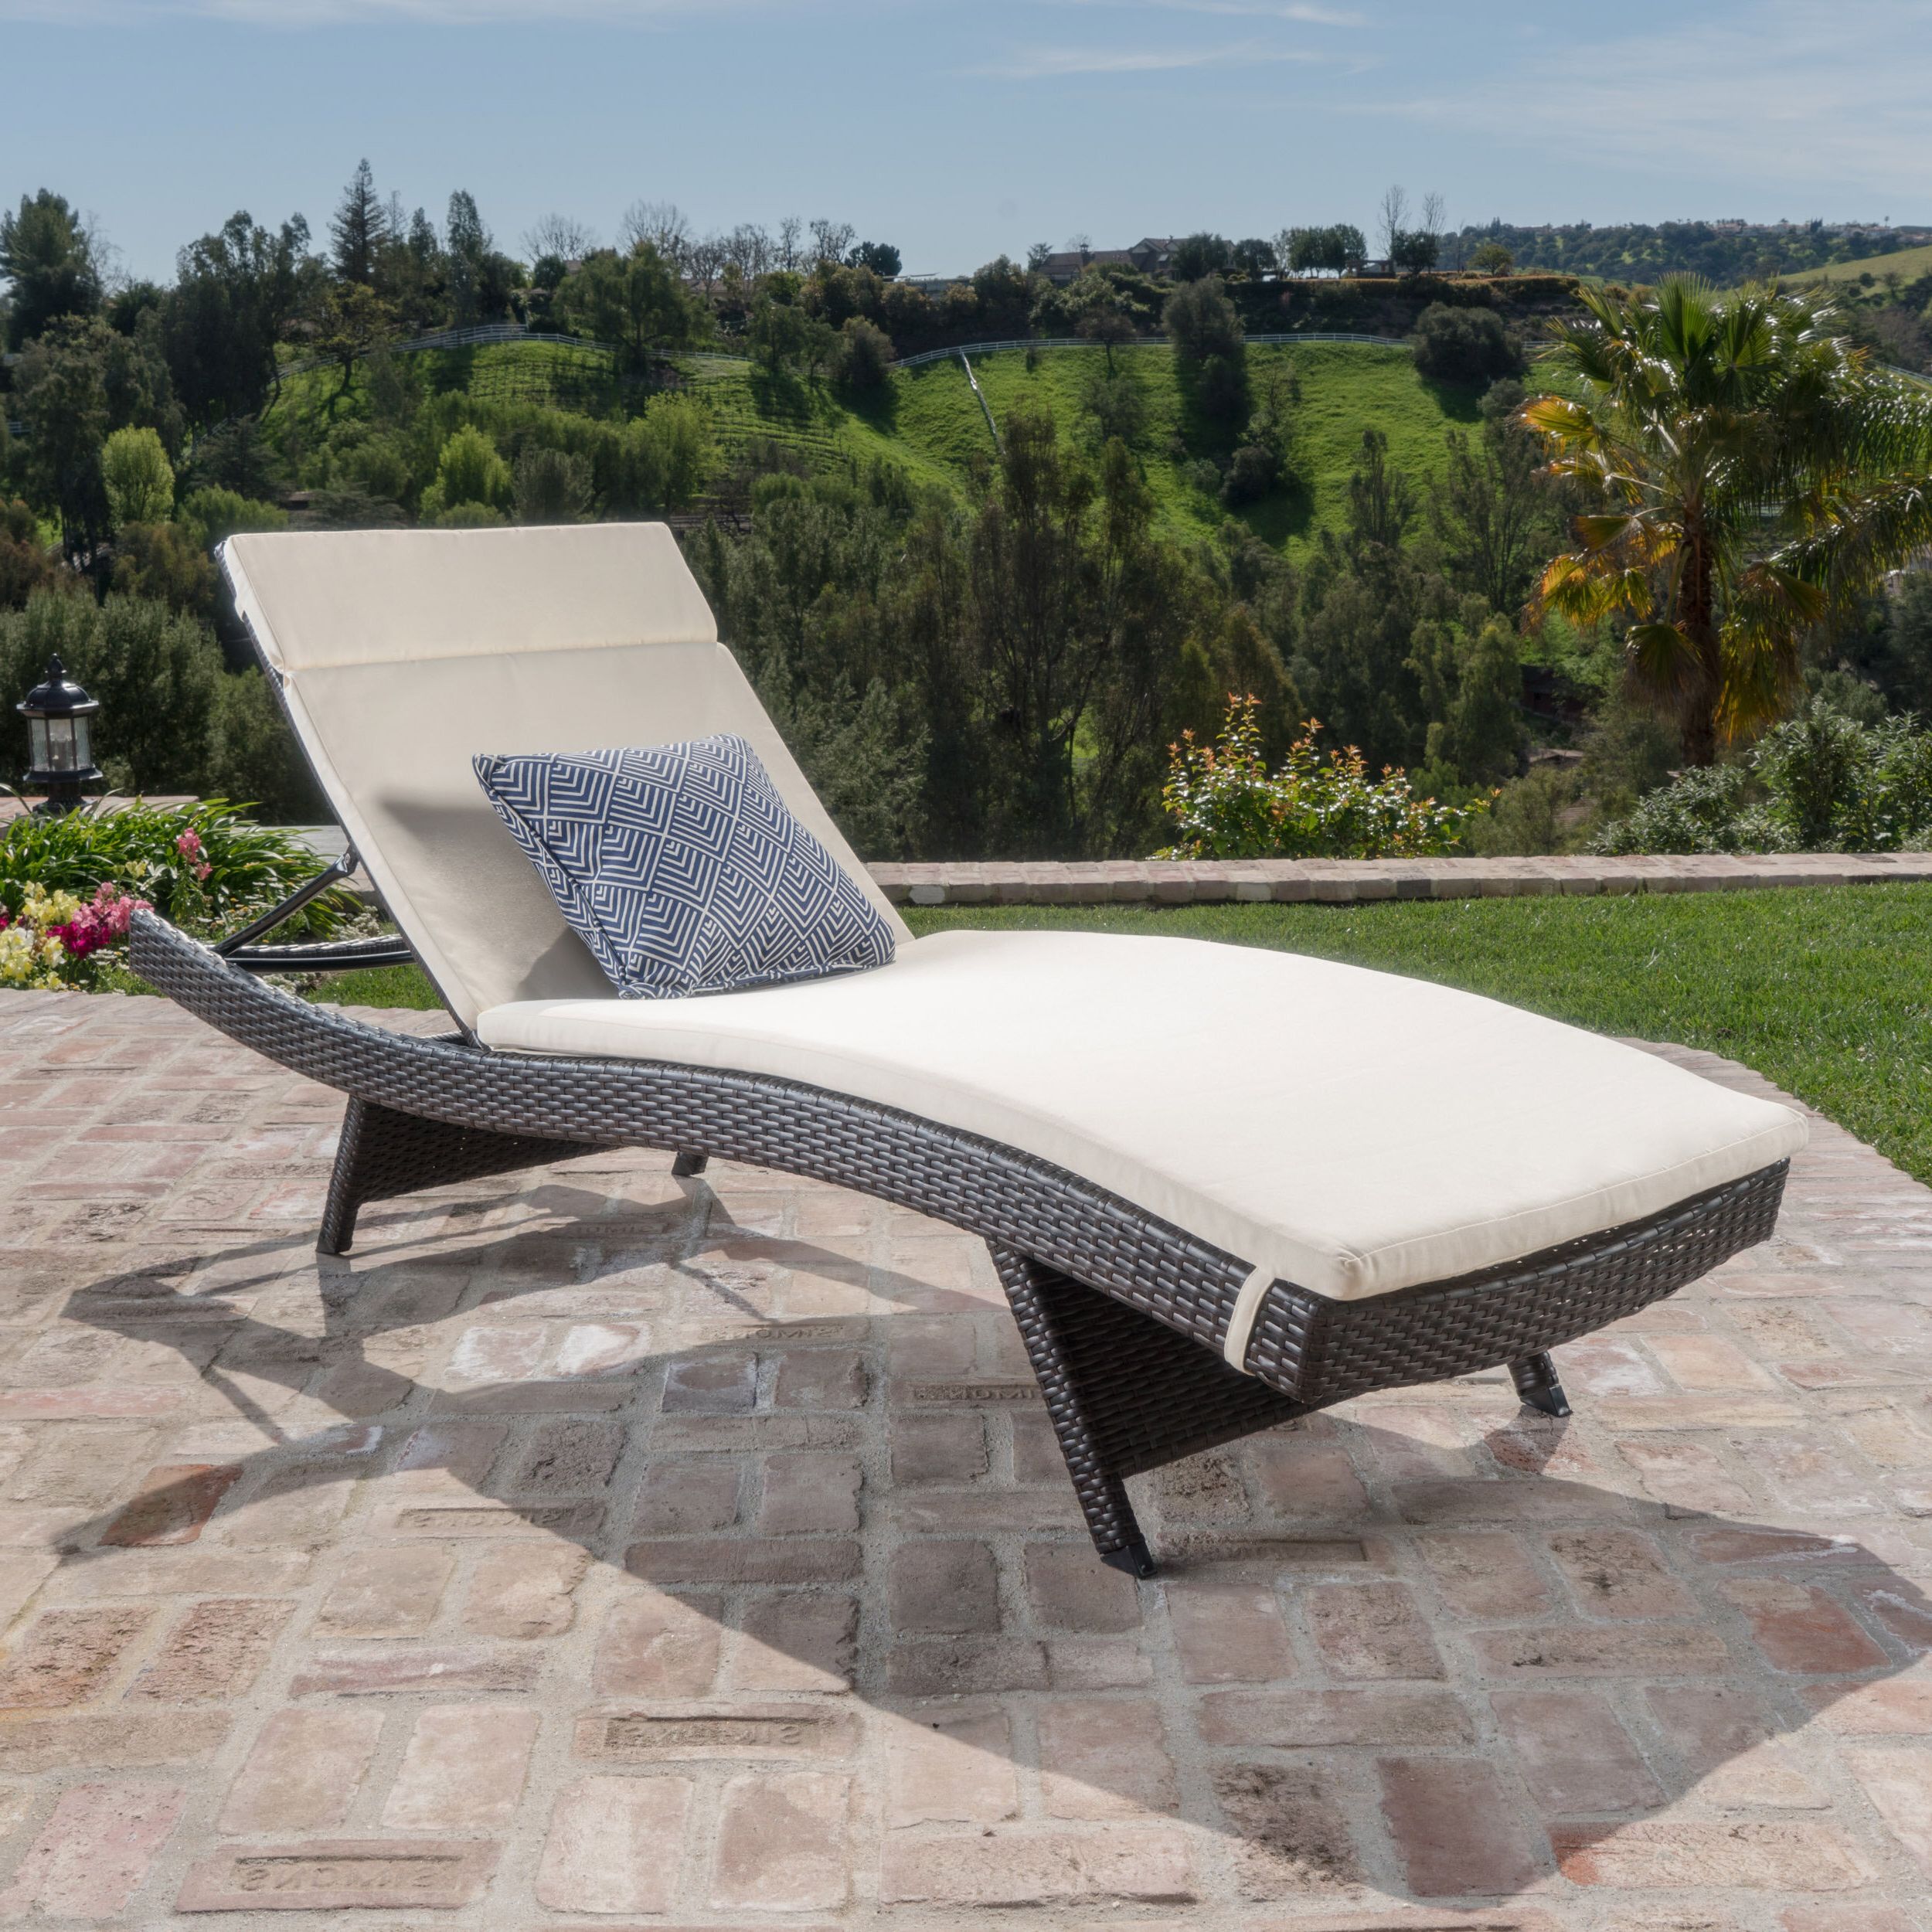 Ullman Adjustable Chaise Lounge With Beige Cushions For Current Wicker Adjustable Chaise Loungers With Cushion (View 13 of 25)